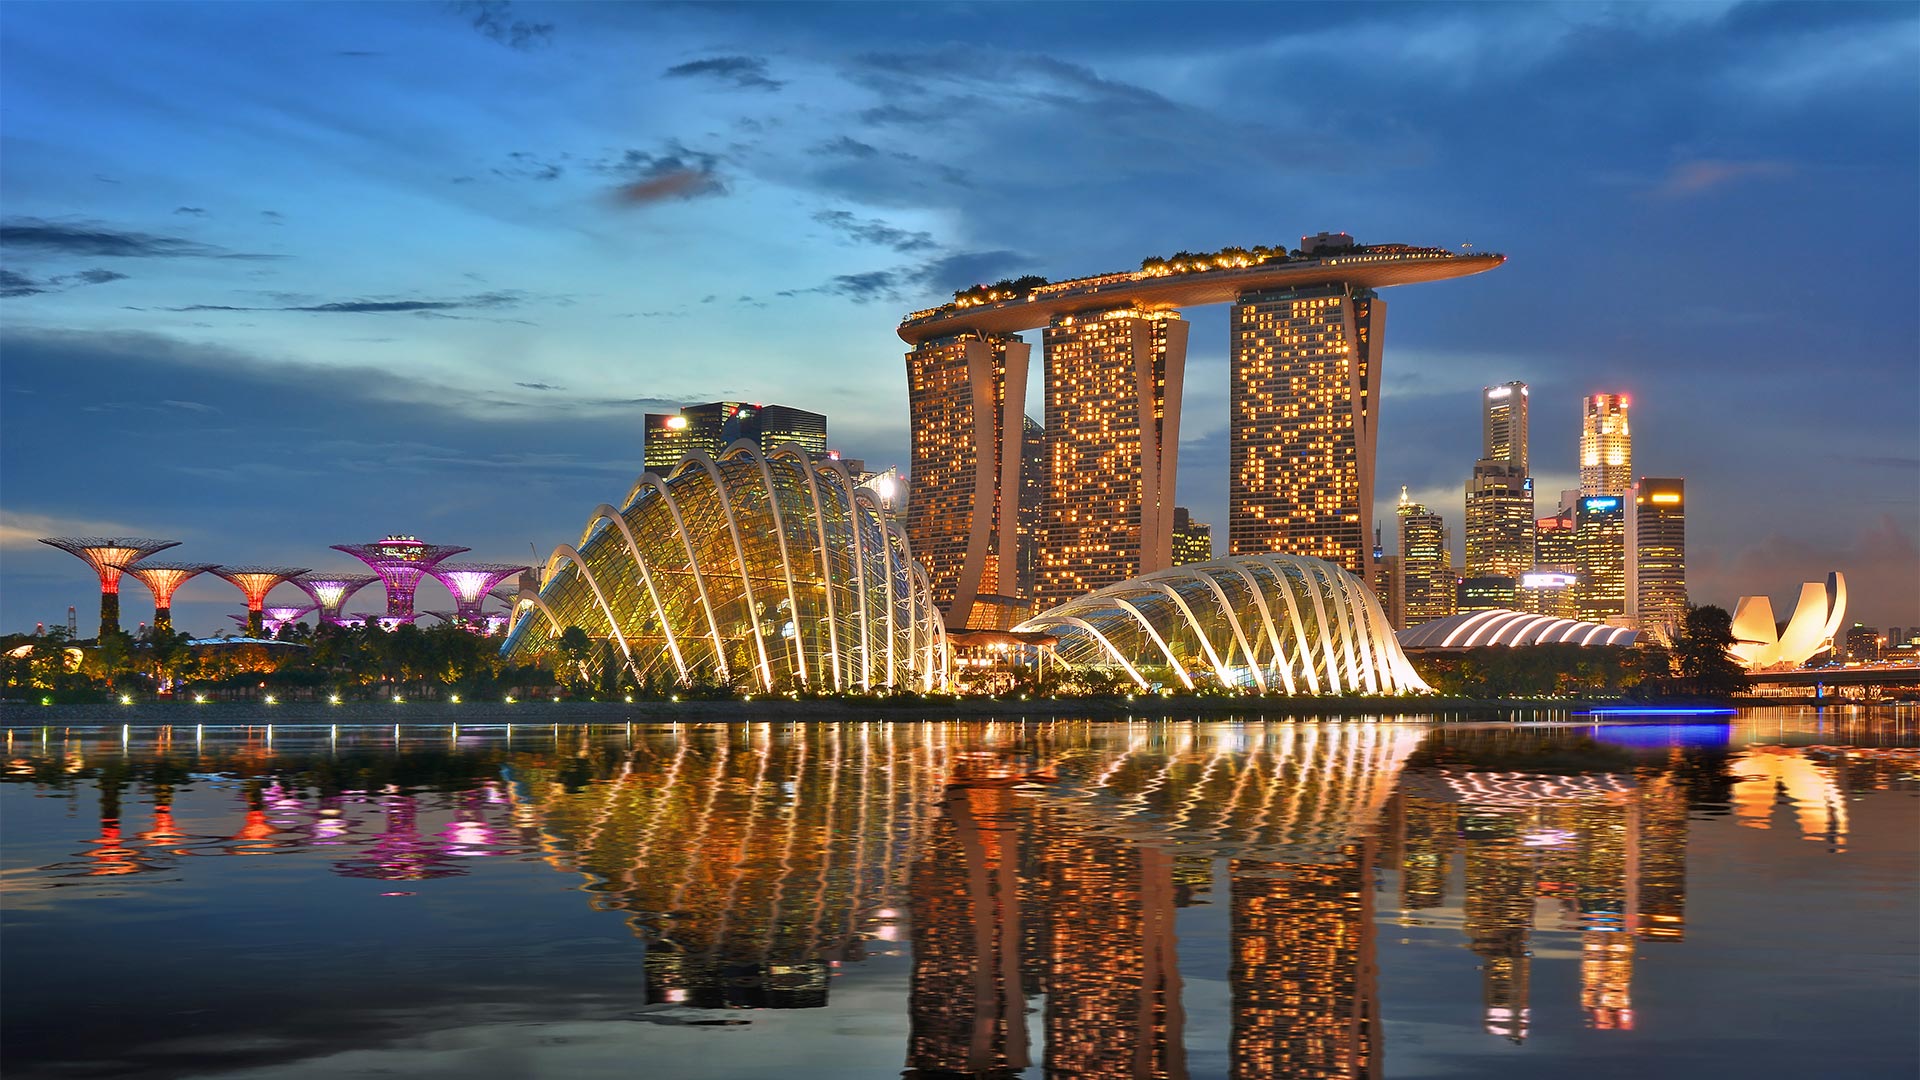 Marina Bay Sands and the flower dome of Gardens by the Bay at night in Singapore